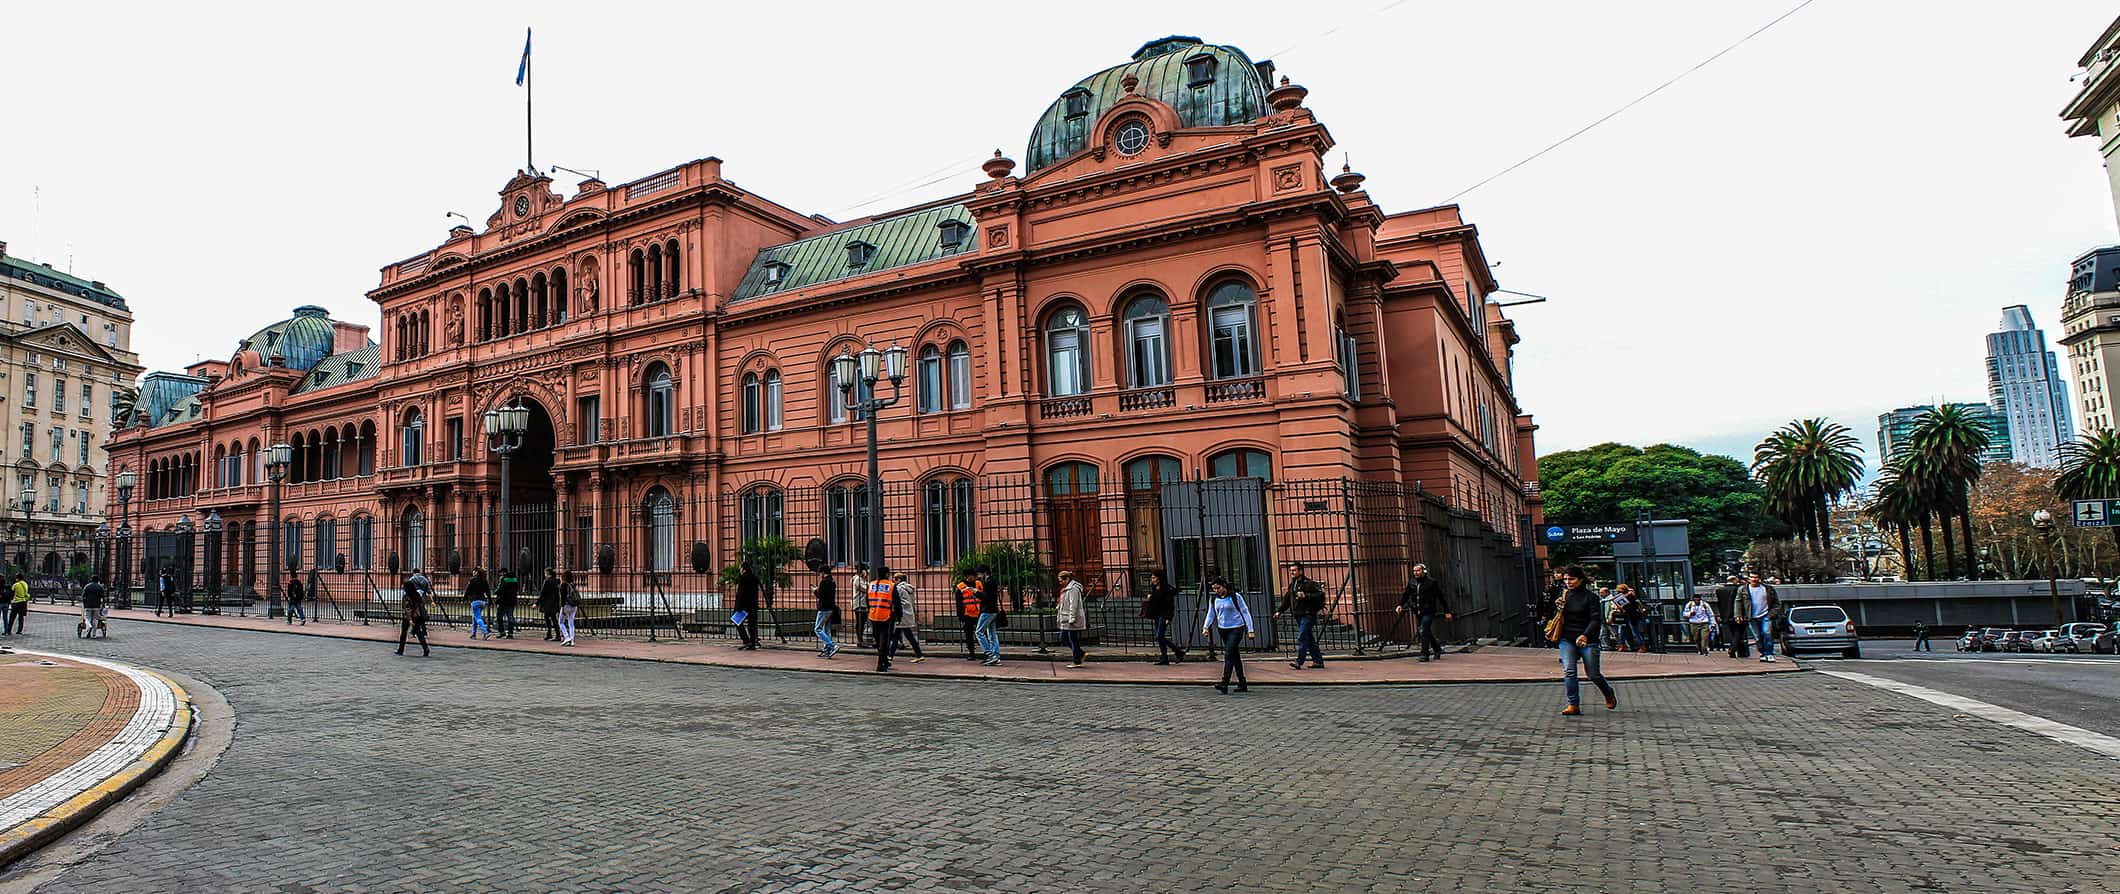 Street view in Buenos Aires, Argentina featuring people walking around in front of the historic Casa Rosada building